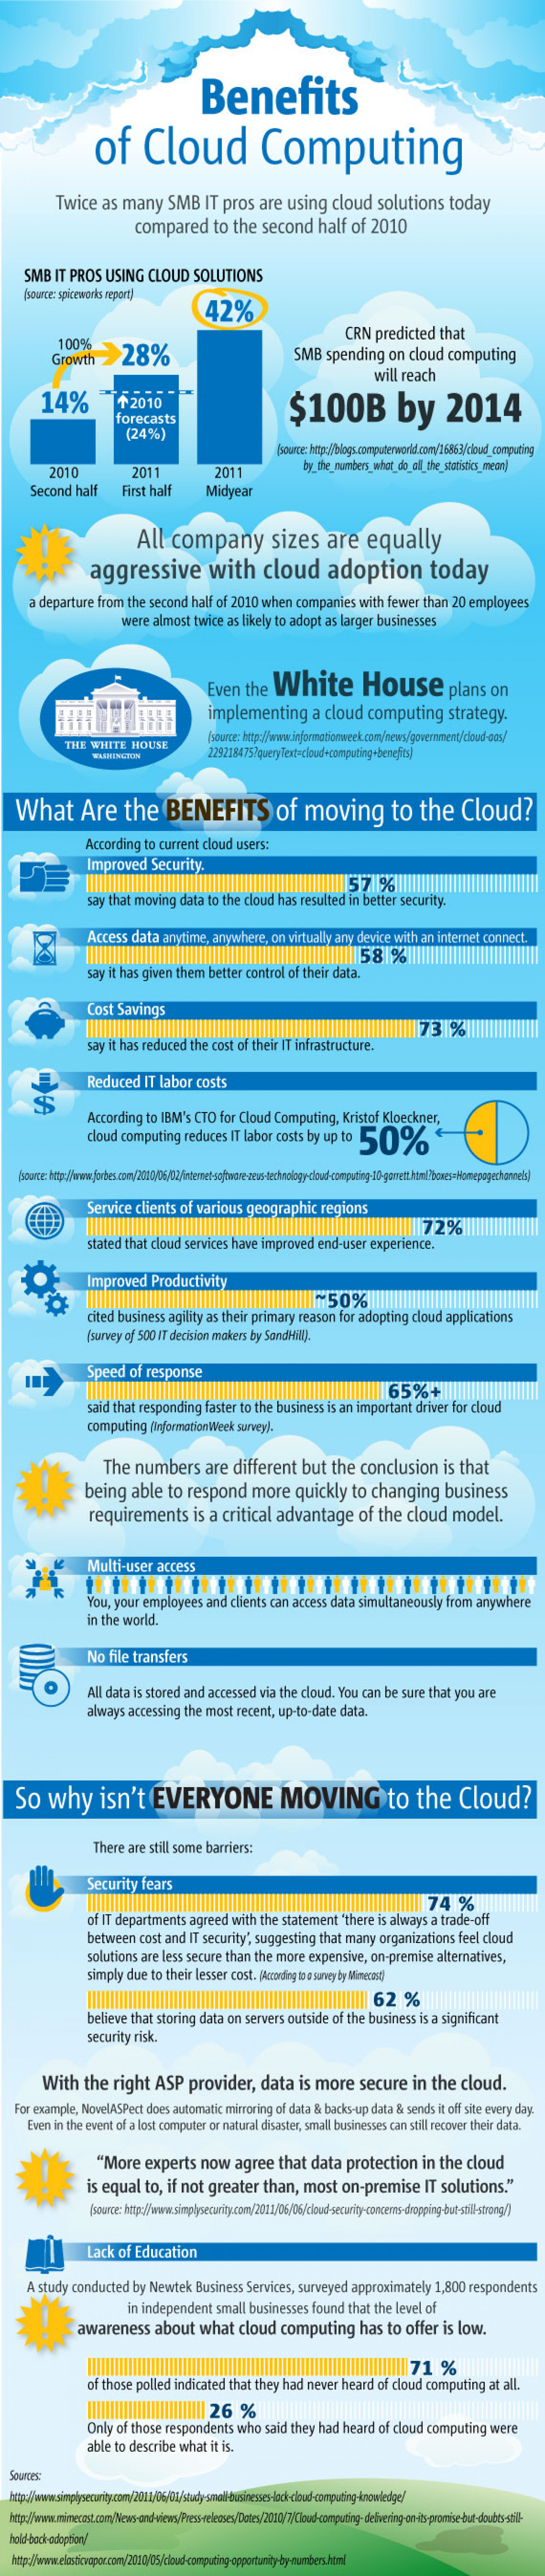 7 Benefits of Cloud Computing for Small Business Infographic